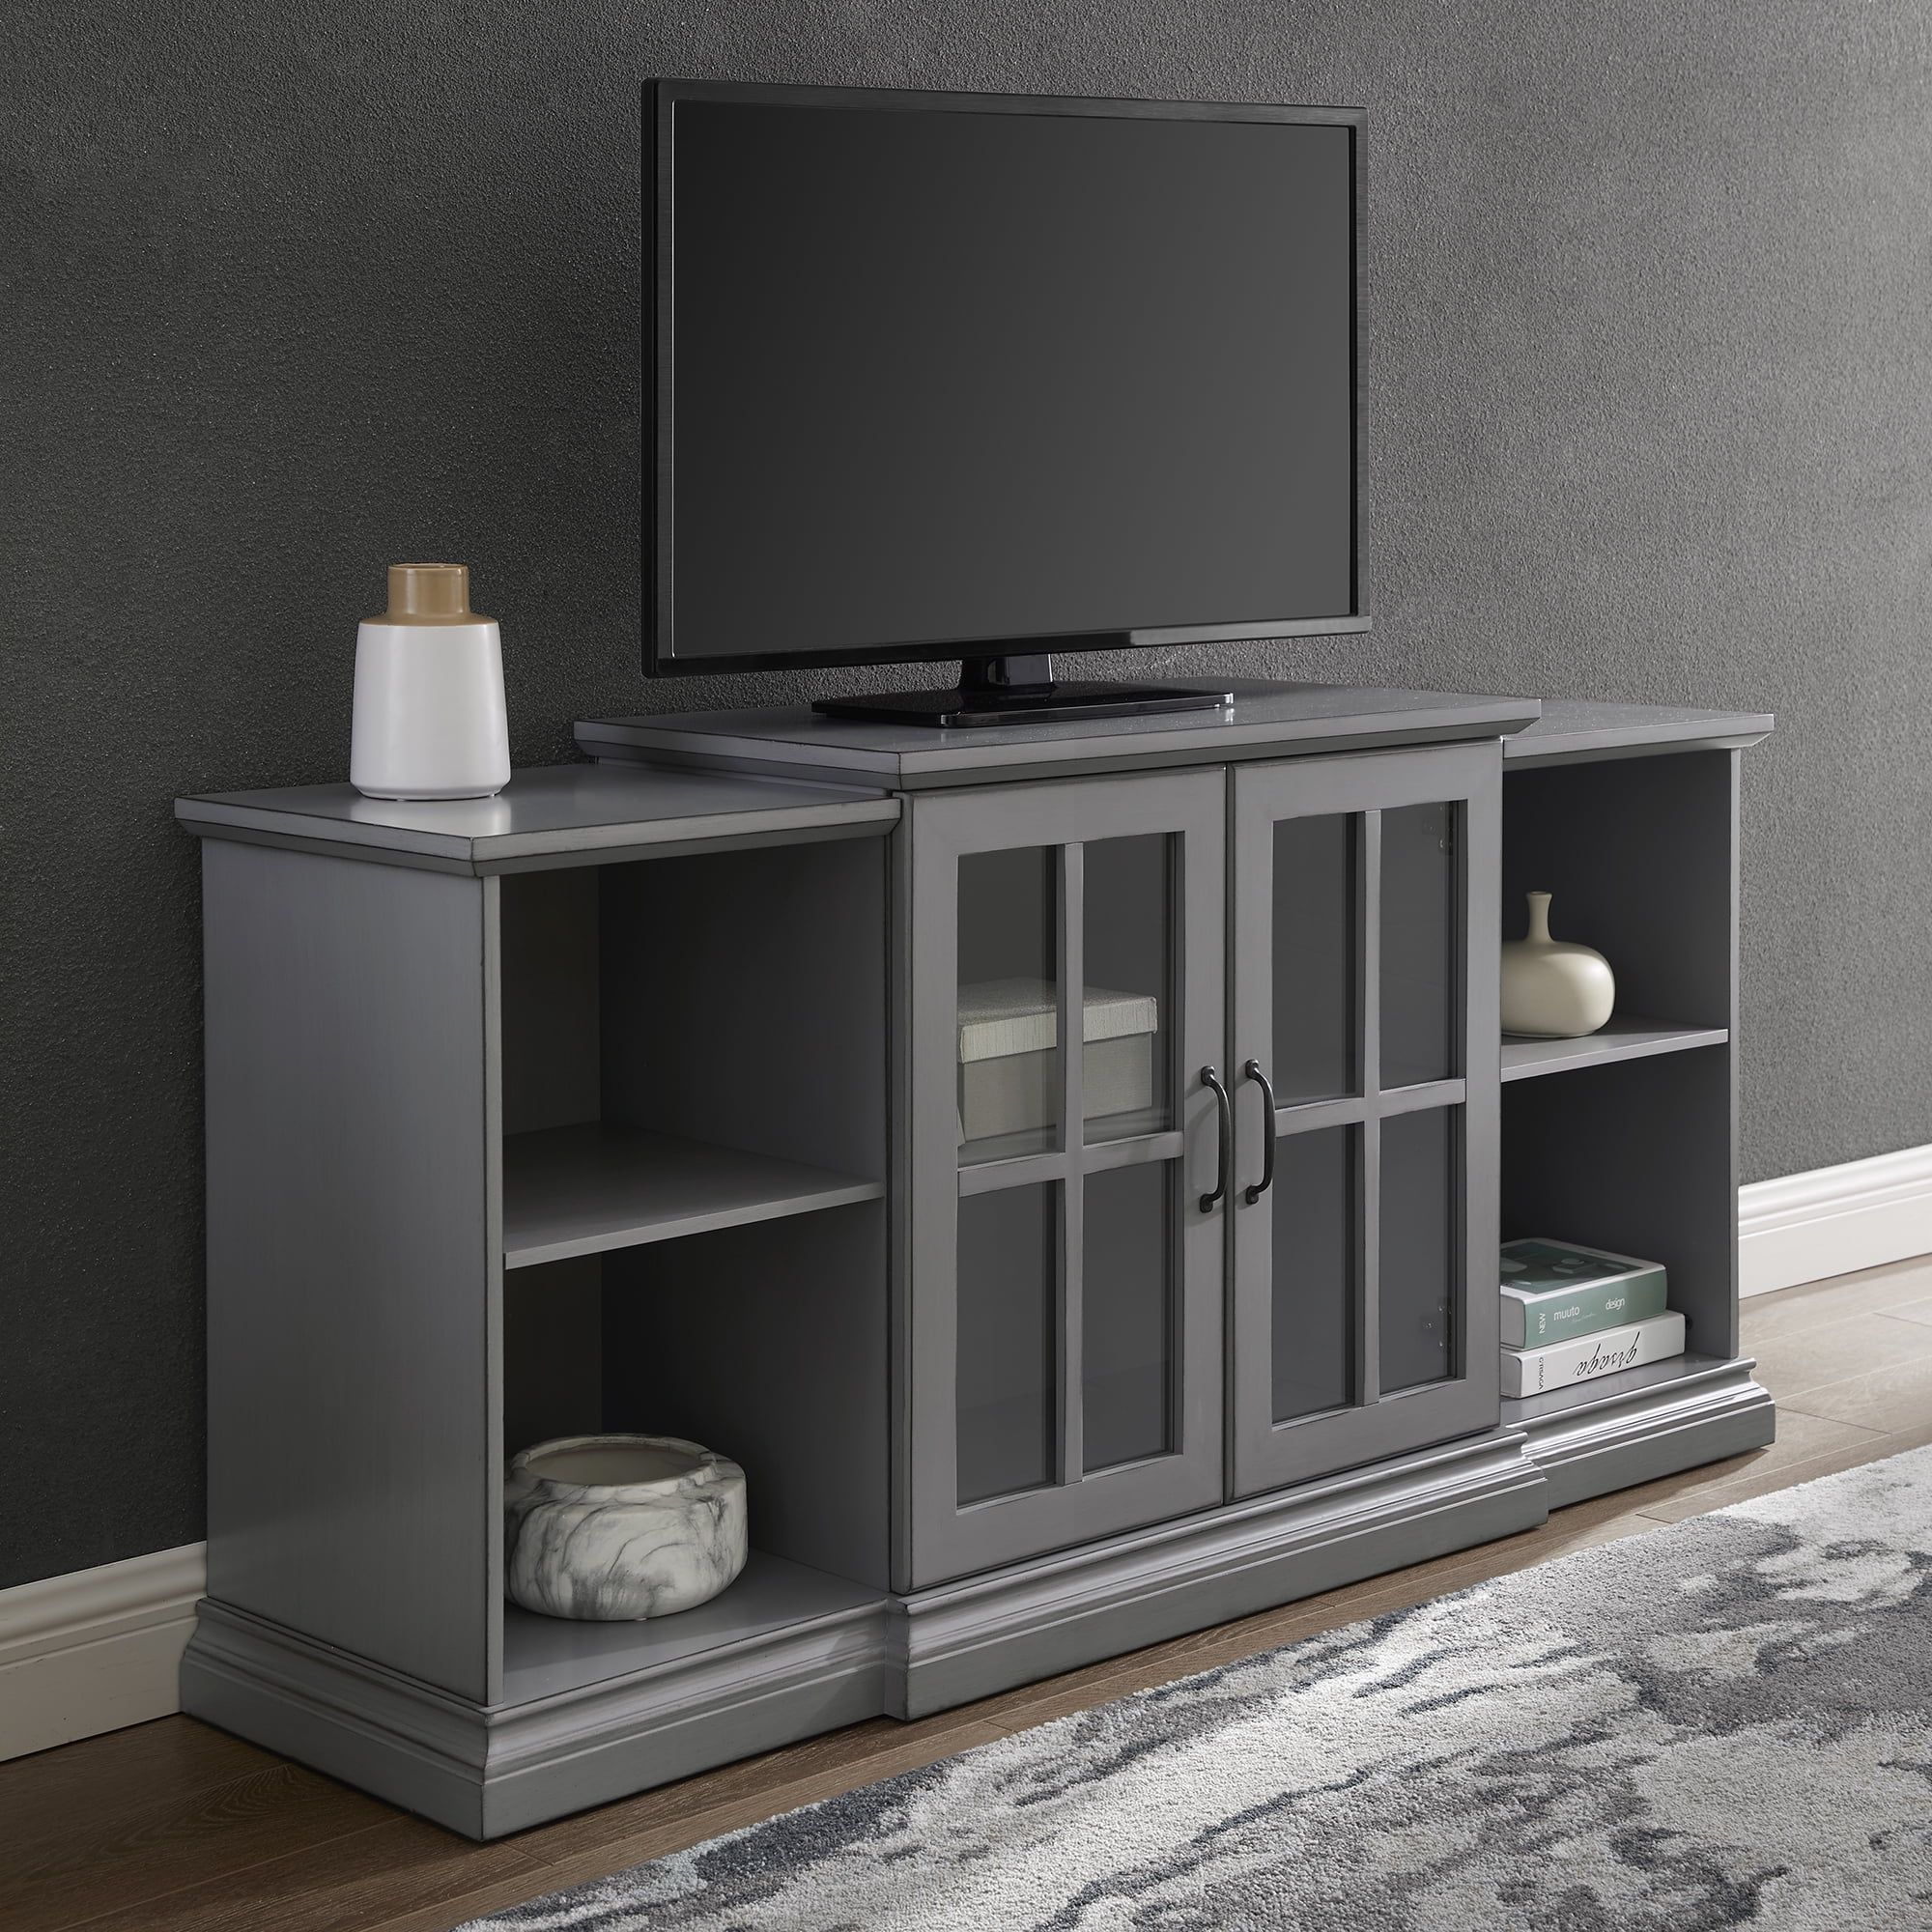 Manor Park Classic Tiered Tv Stand For Tvs Up To 65", Antique Grey Pertaining To Tier Stands For Tvs (Gallery 5 of 20)